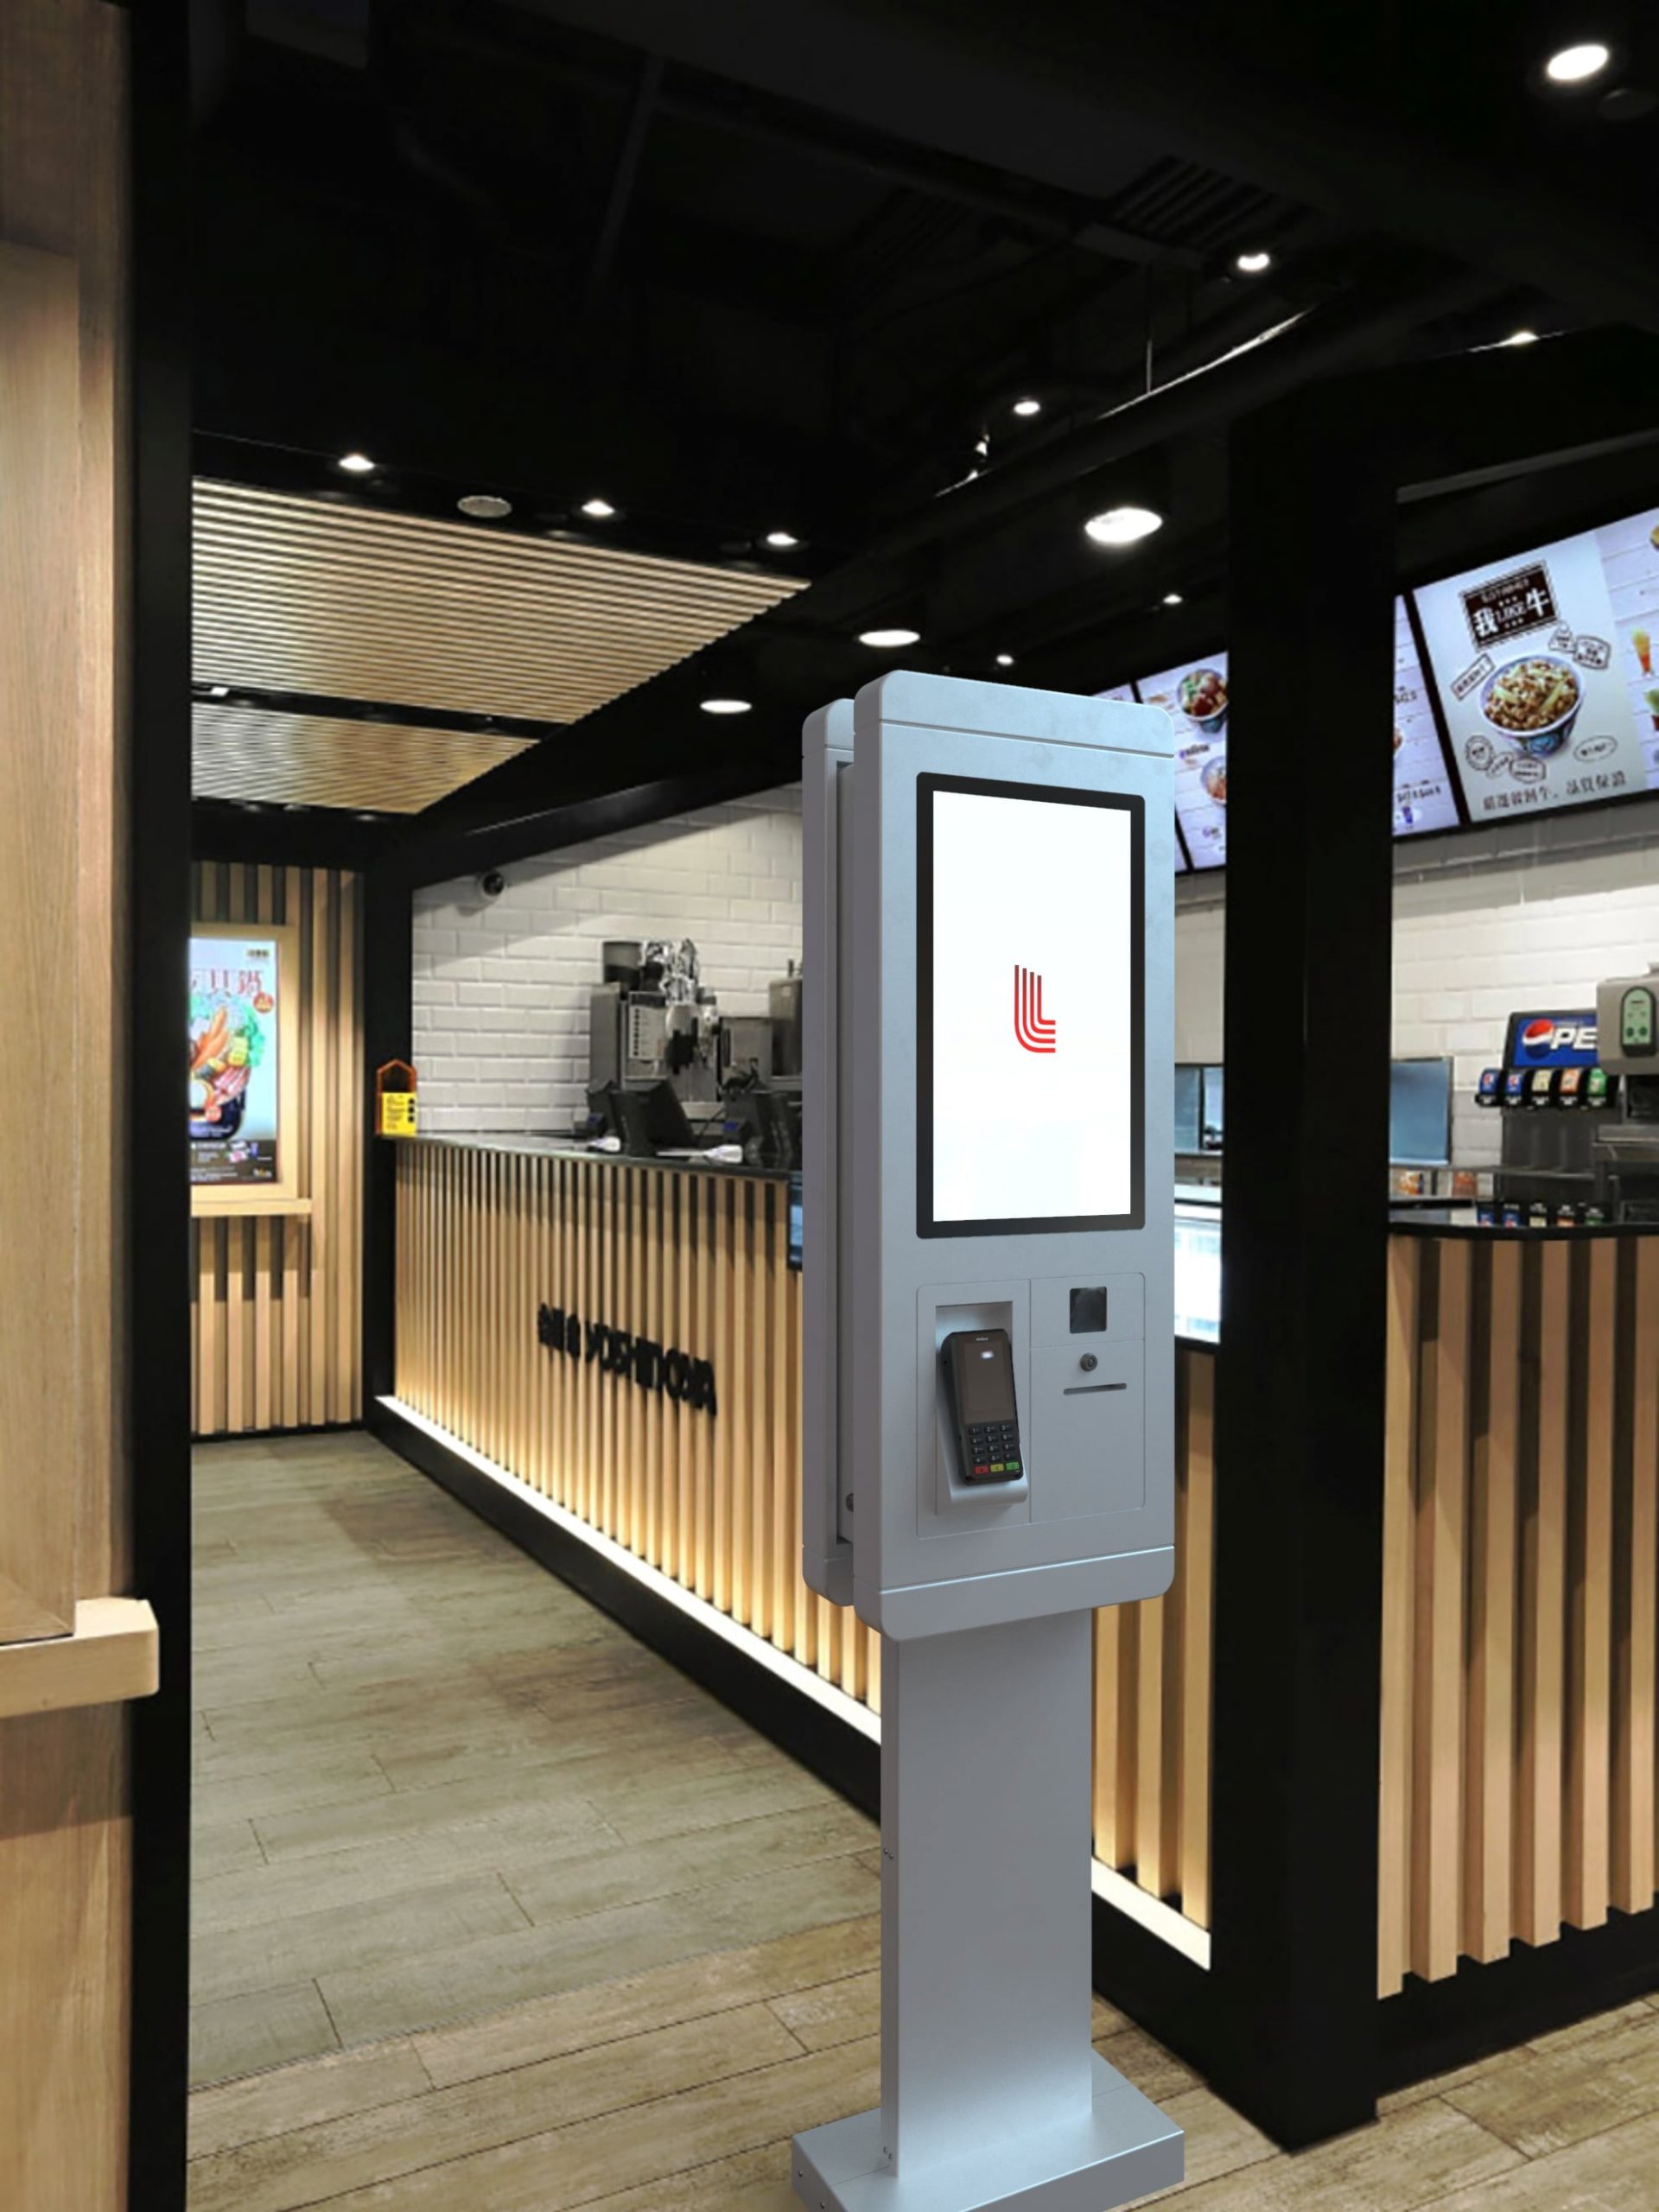 restaurant kiosk for self ordering and payment